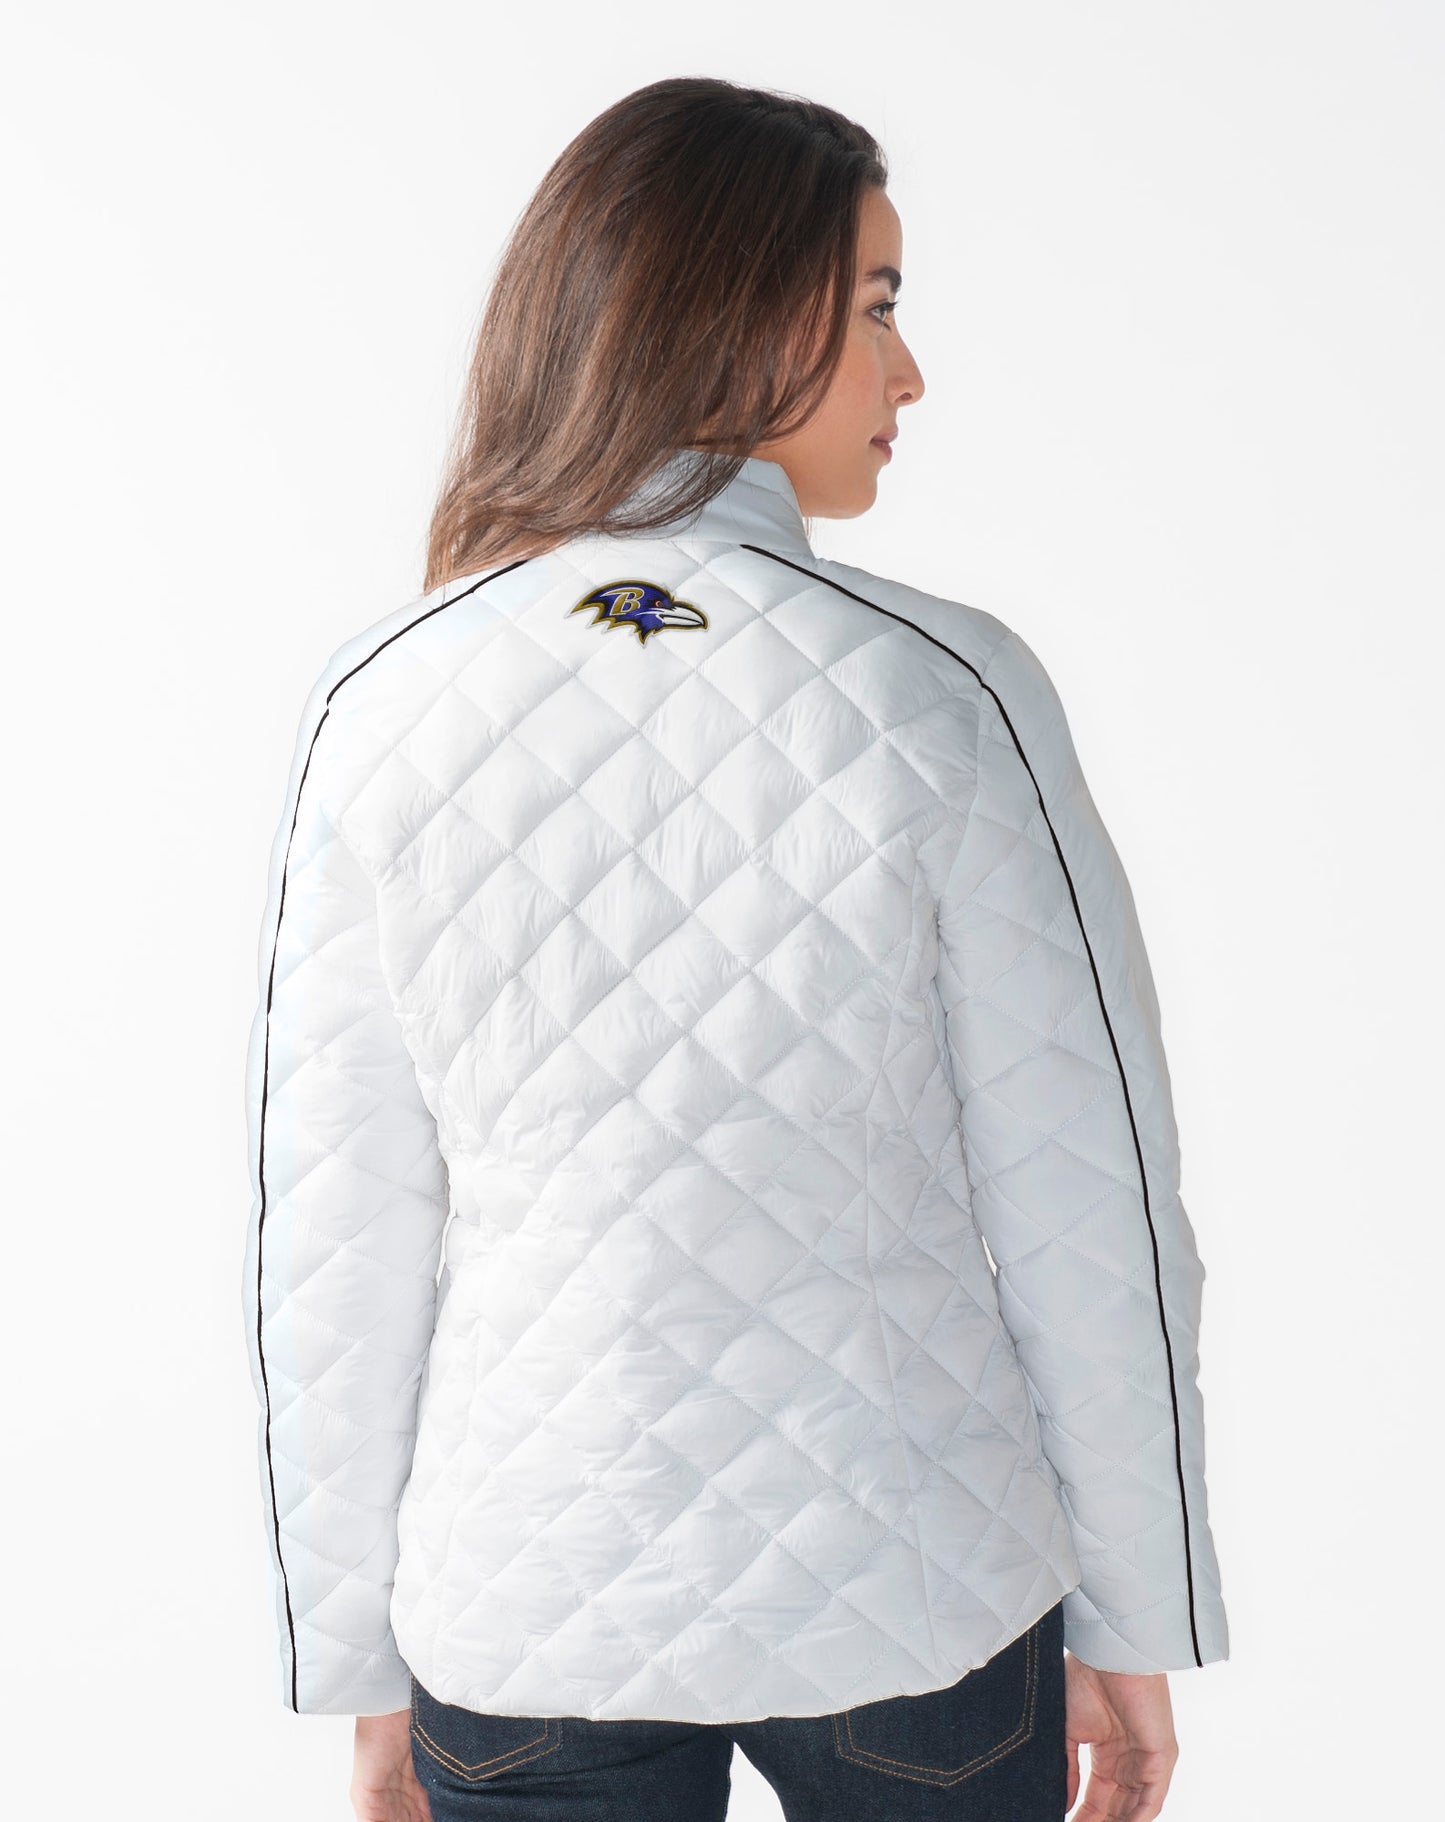 Baltimore Ravens Women's Essential Quilted Jacket by G-III - White